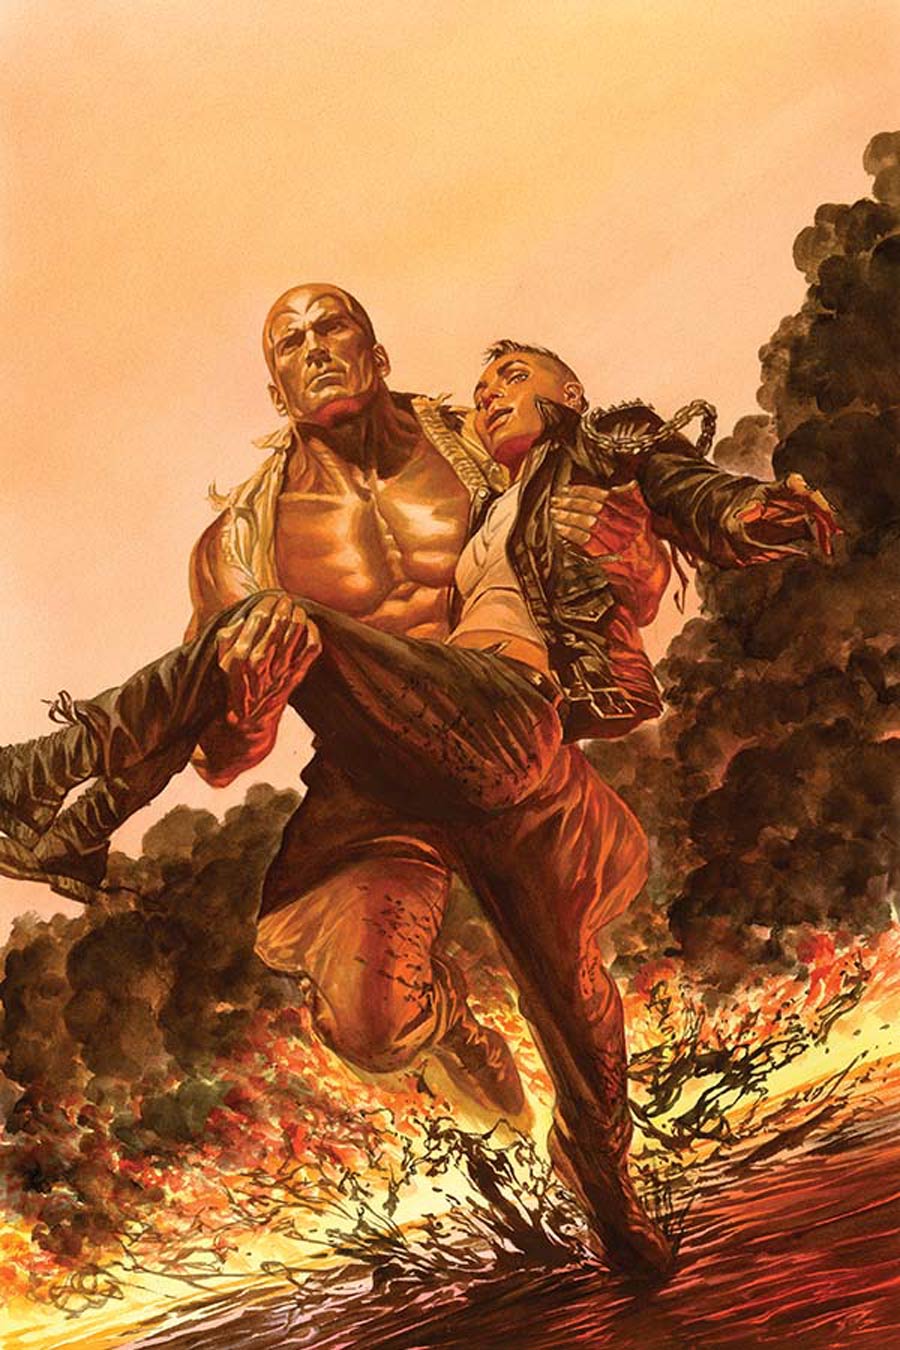 Doc Savage Vol 5 #4 Cover C High-End Alex Ross Virgin Art Ultra-Limited Variant Cover (ONLY 50 COPIES IN EXISTENCE!)